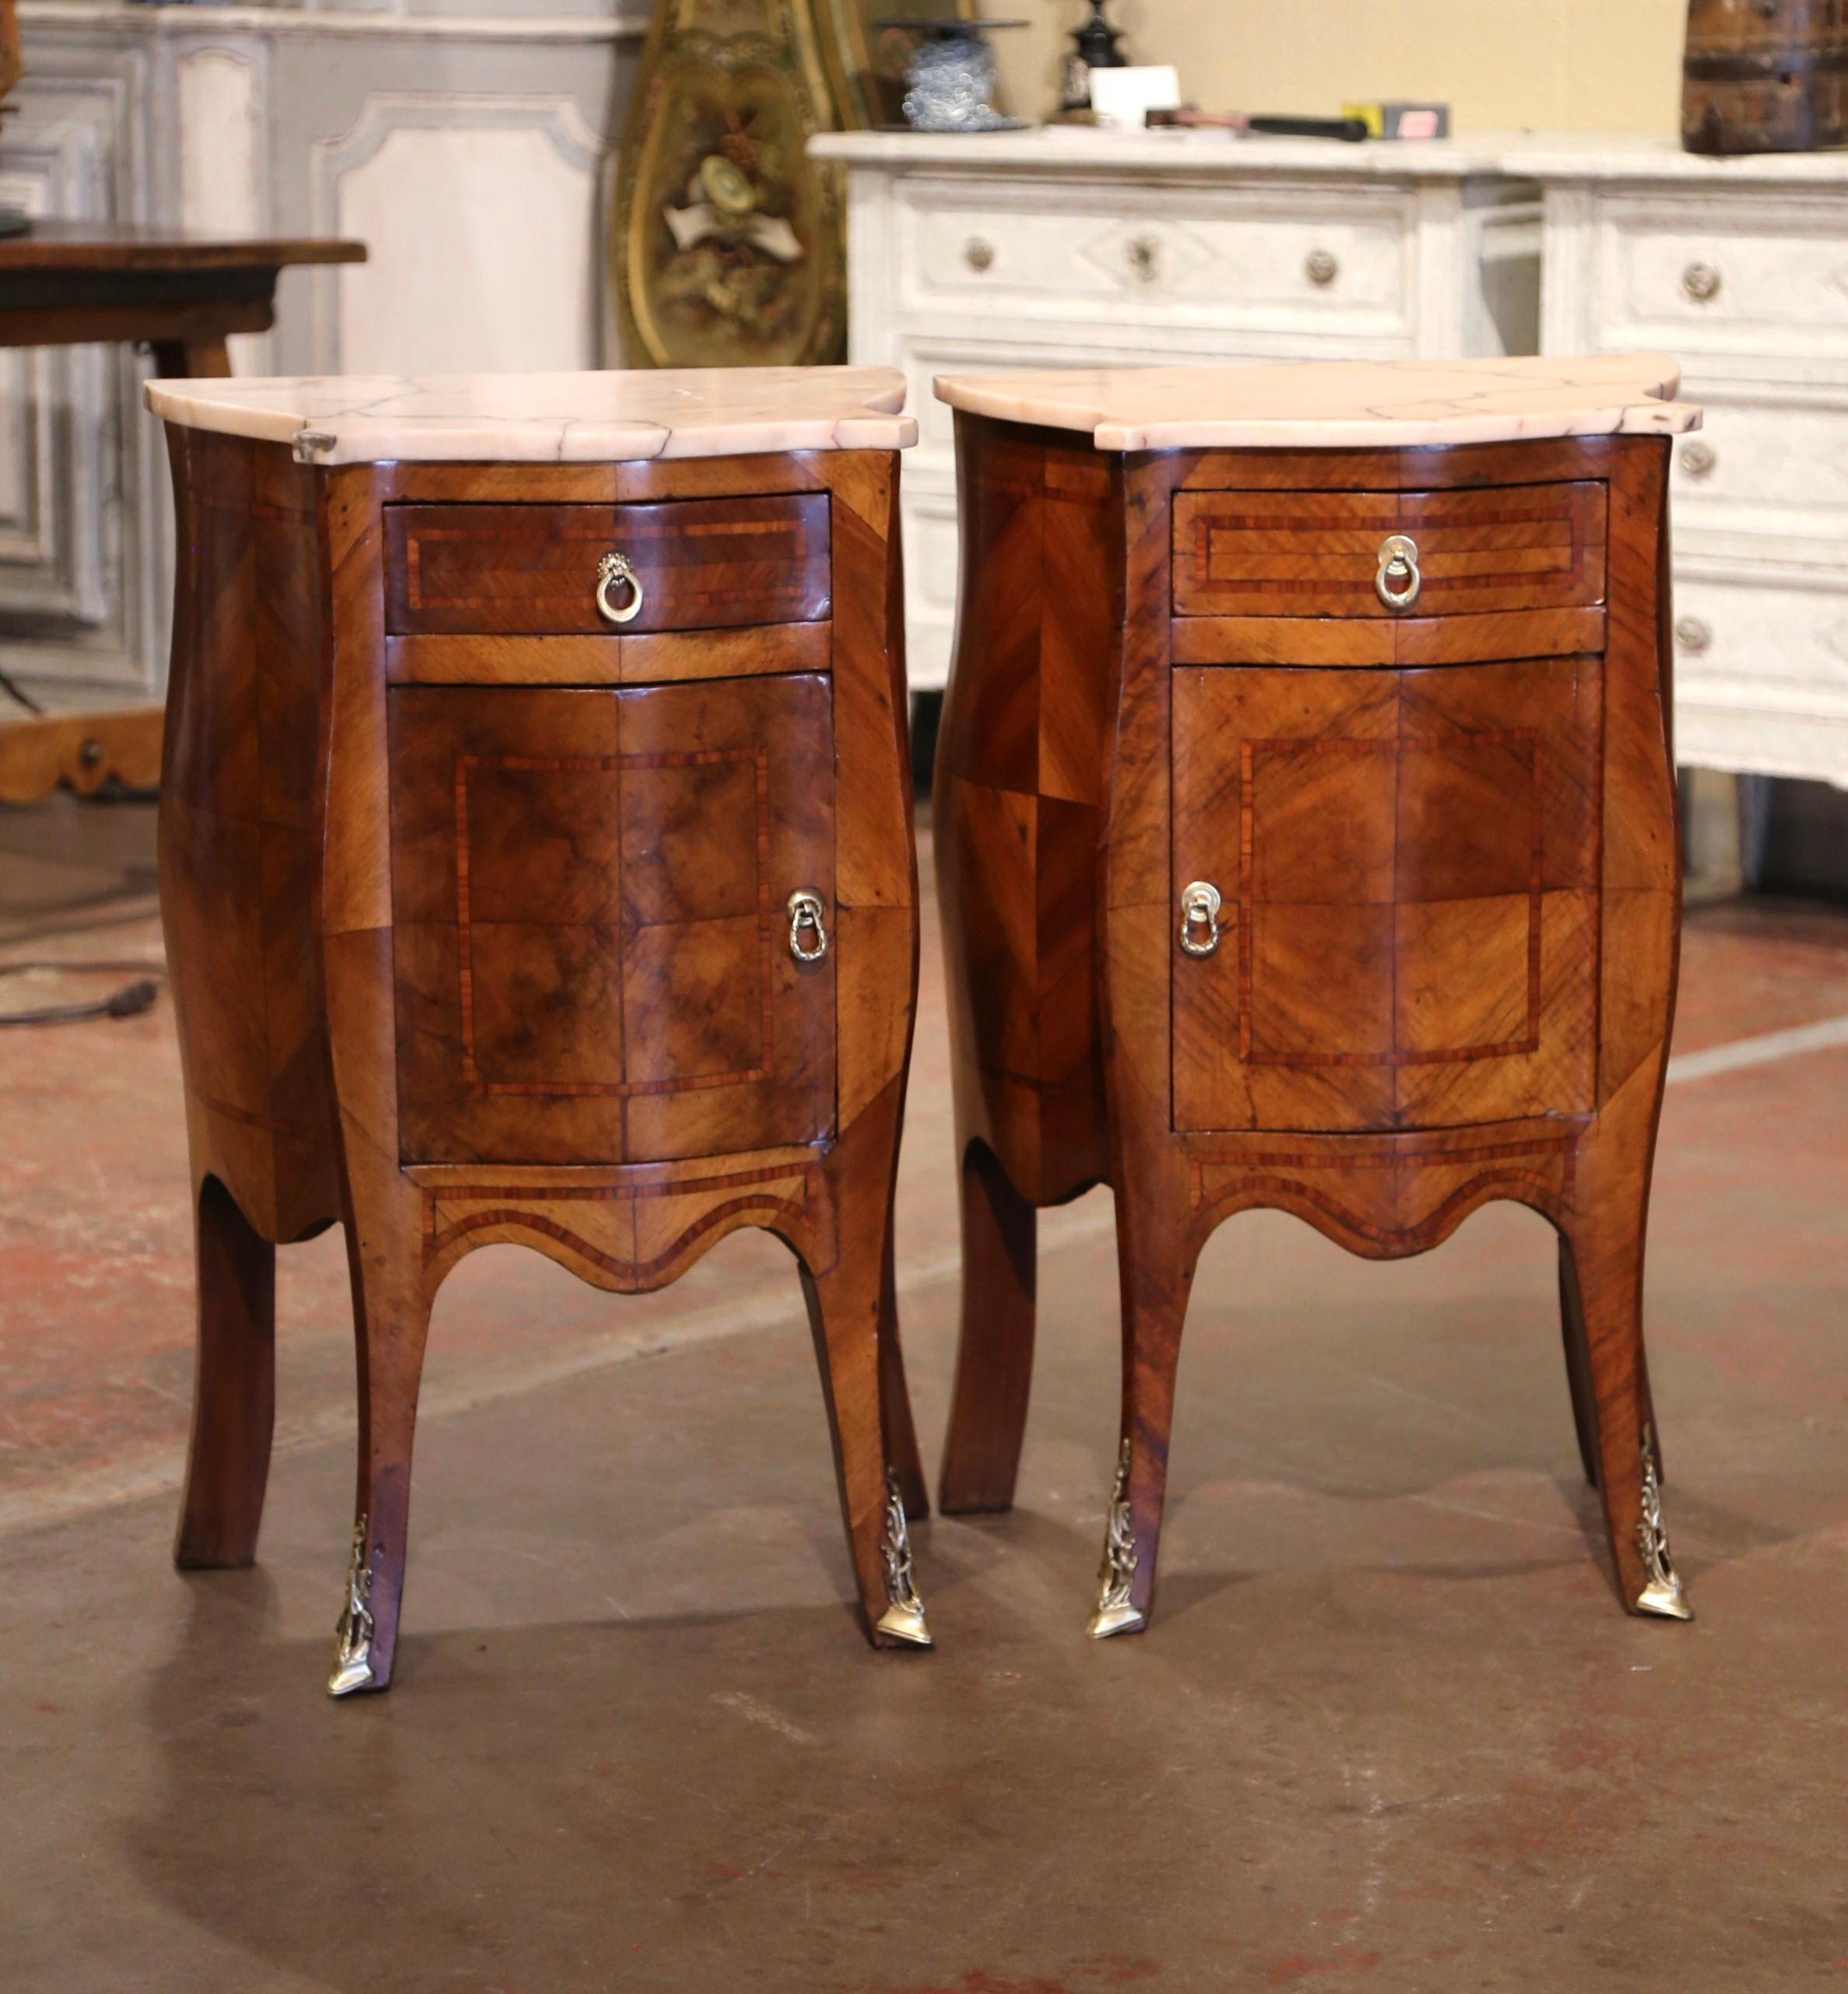 These elegant antique bedside tables were created in France, circa 1890. Bombe on all three sides with marquetry inlay and veneer bands throughout, the fruitwood chests stand on cabriole legs ending with decorative bronze sabot feet over a scalloped